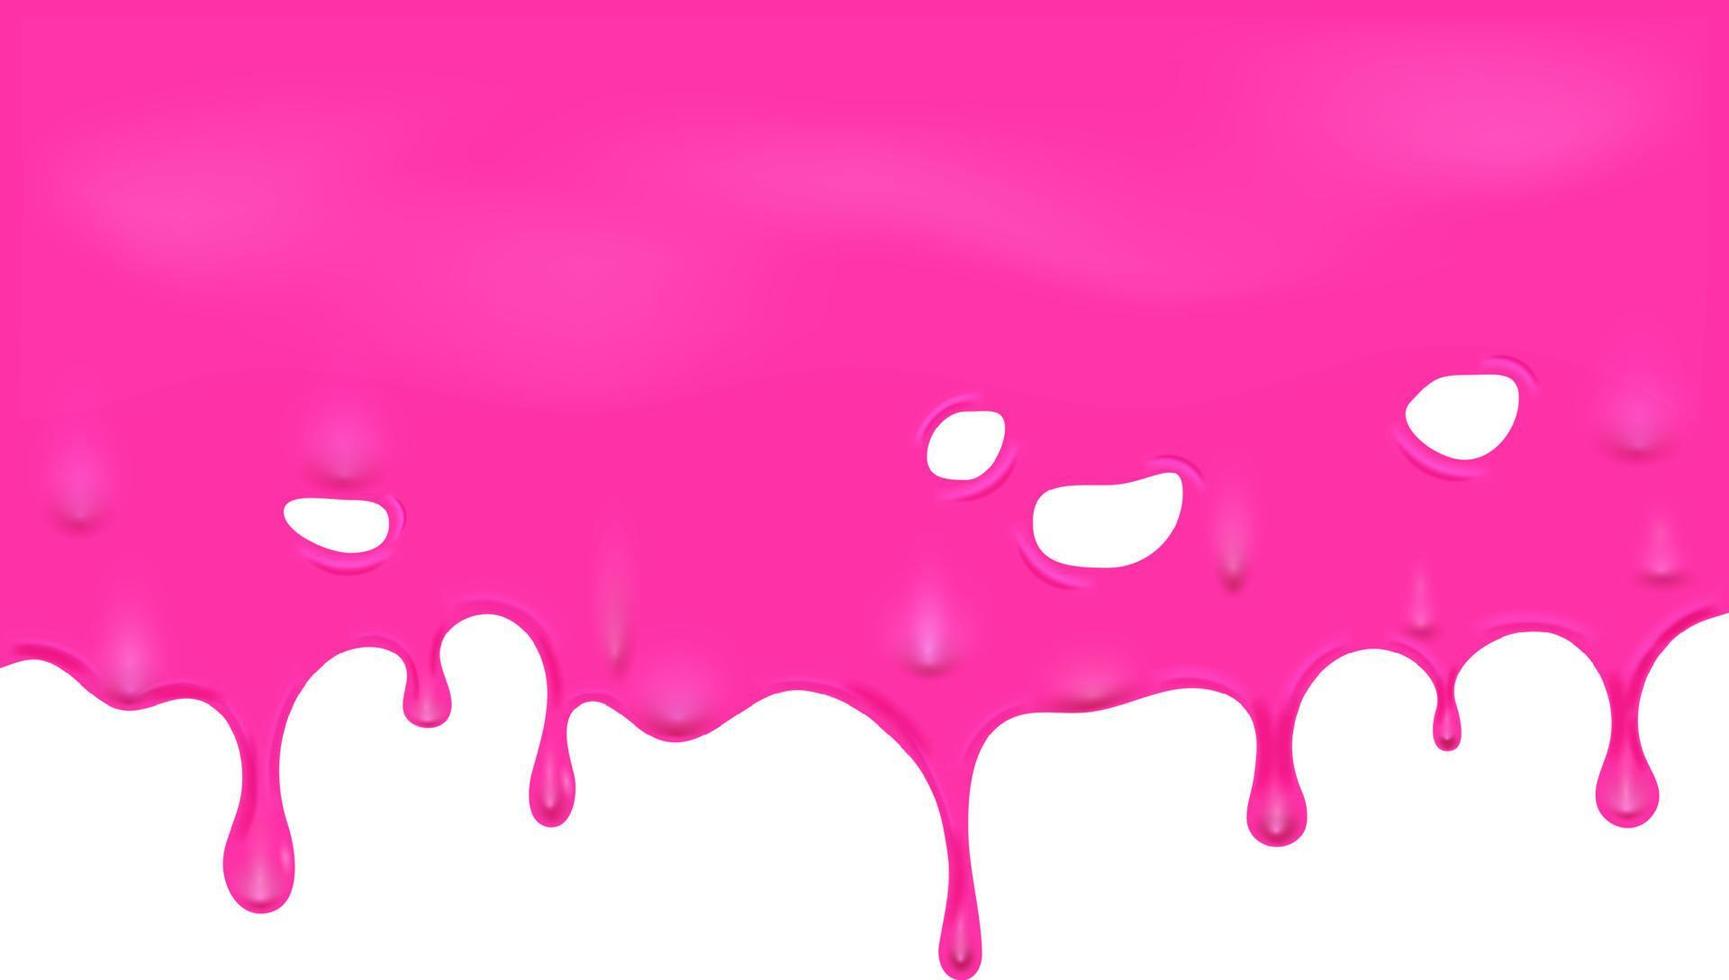 llustration of dripping pink slime and melted. vector illustration